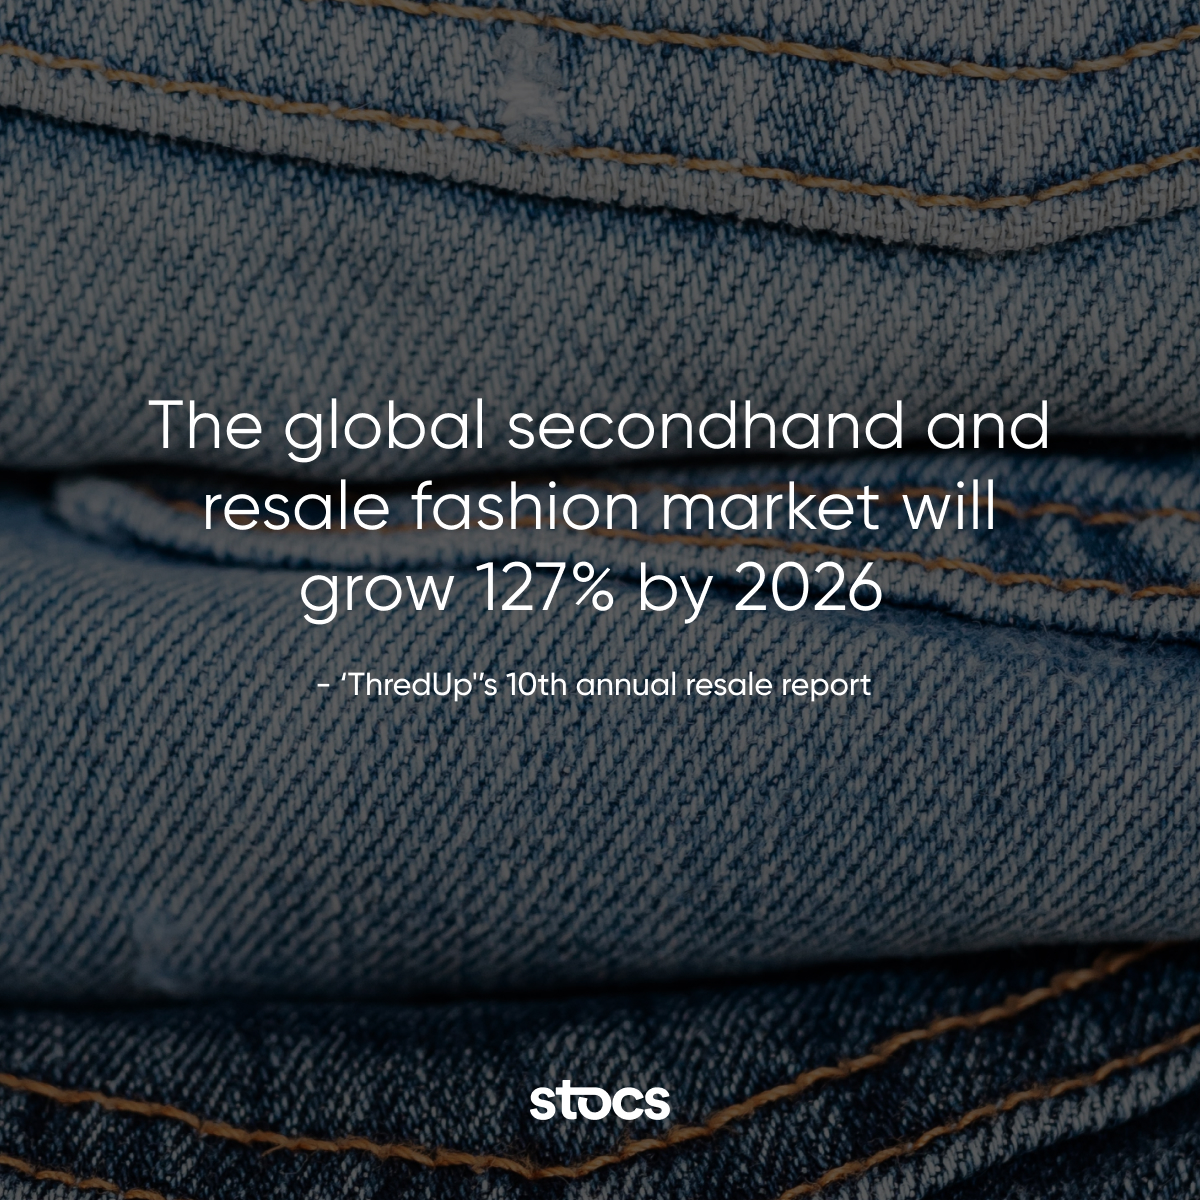 Online resales are expected to more than double in the next five years, reaching $40bn! ♻️

As a retailer, spend some time this #EarthMonth refining your sustainable practices & offering a solution for a new wave of eco-conscious shoppers.

#sustainablefashion #circularfashion